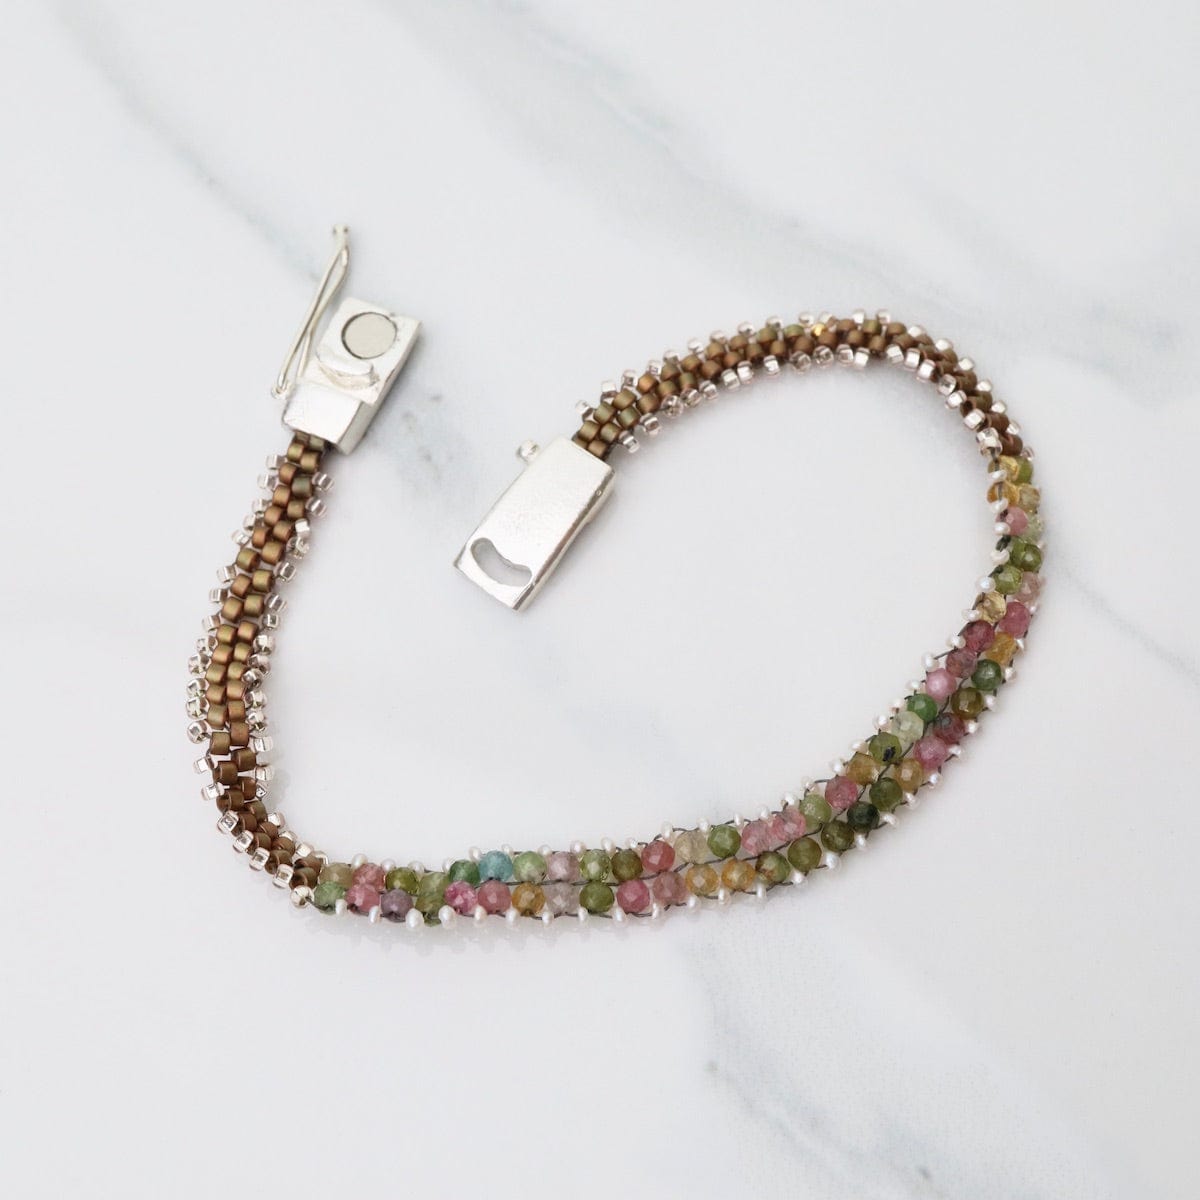 BRC-JM Hand Woven Soft Bracelet of Tourmaline with Tiny Pearls